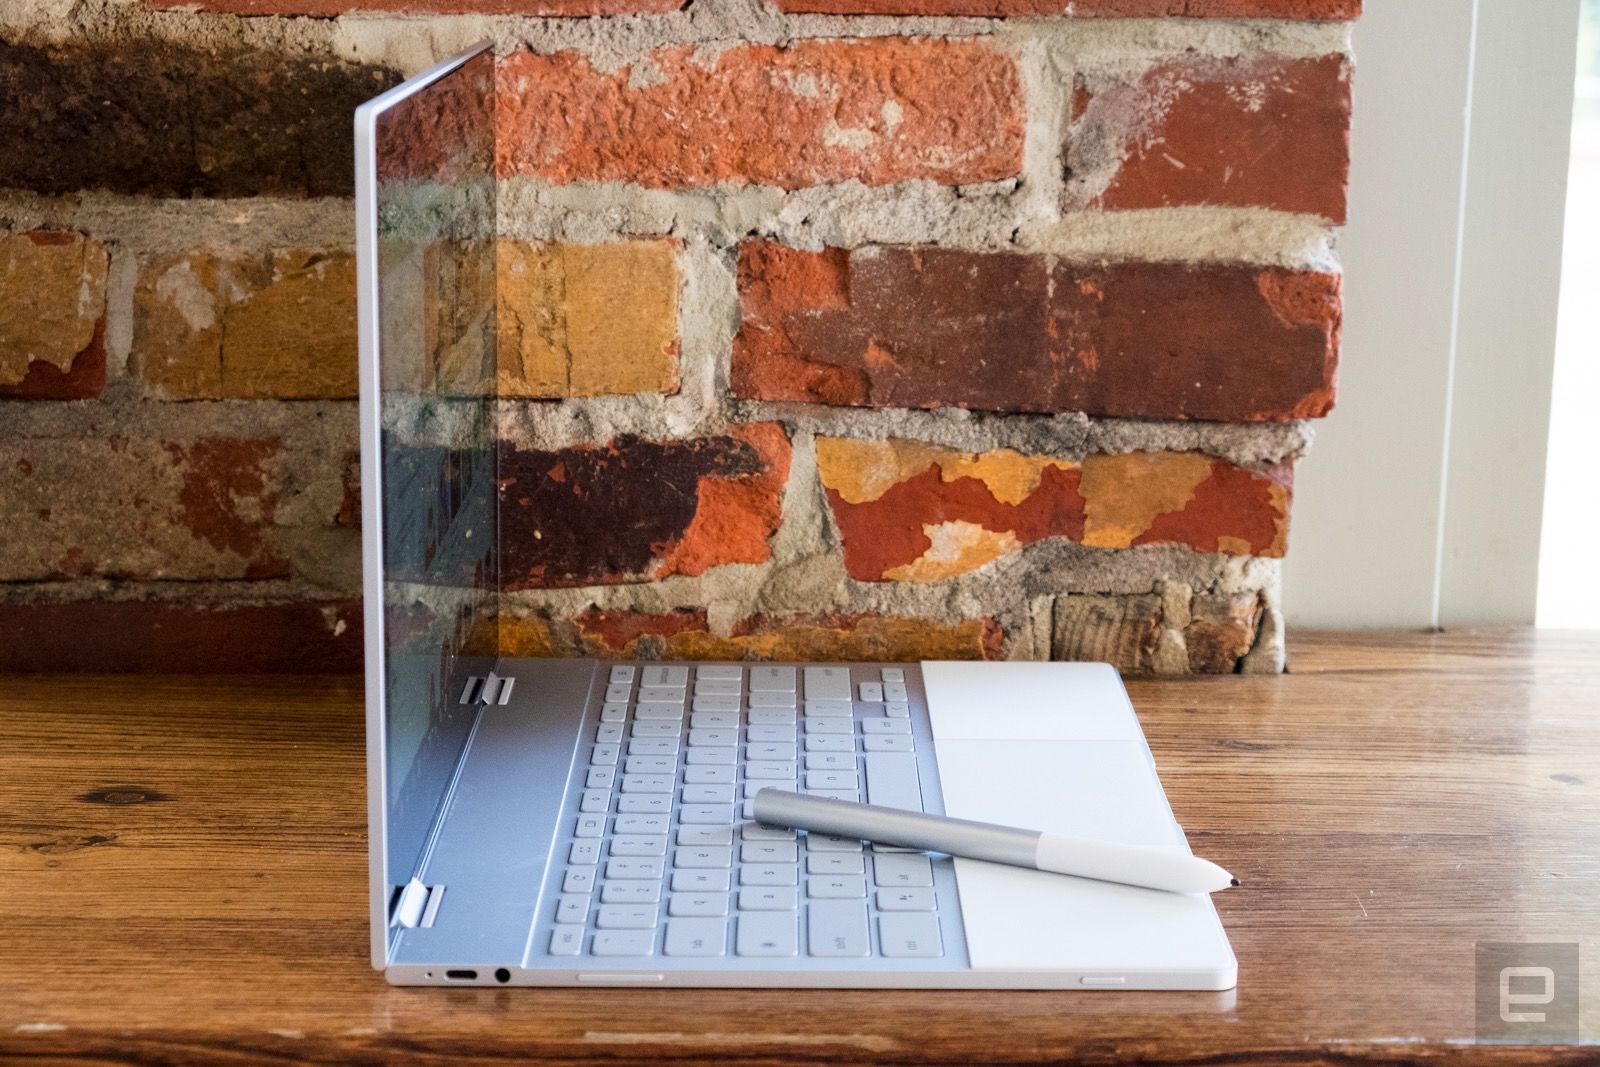 Google Pixelbook review: A premium Chromebook that's worth the price